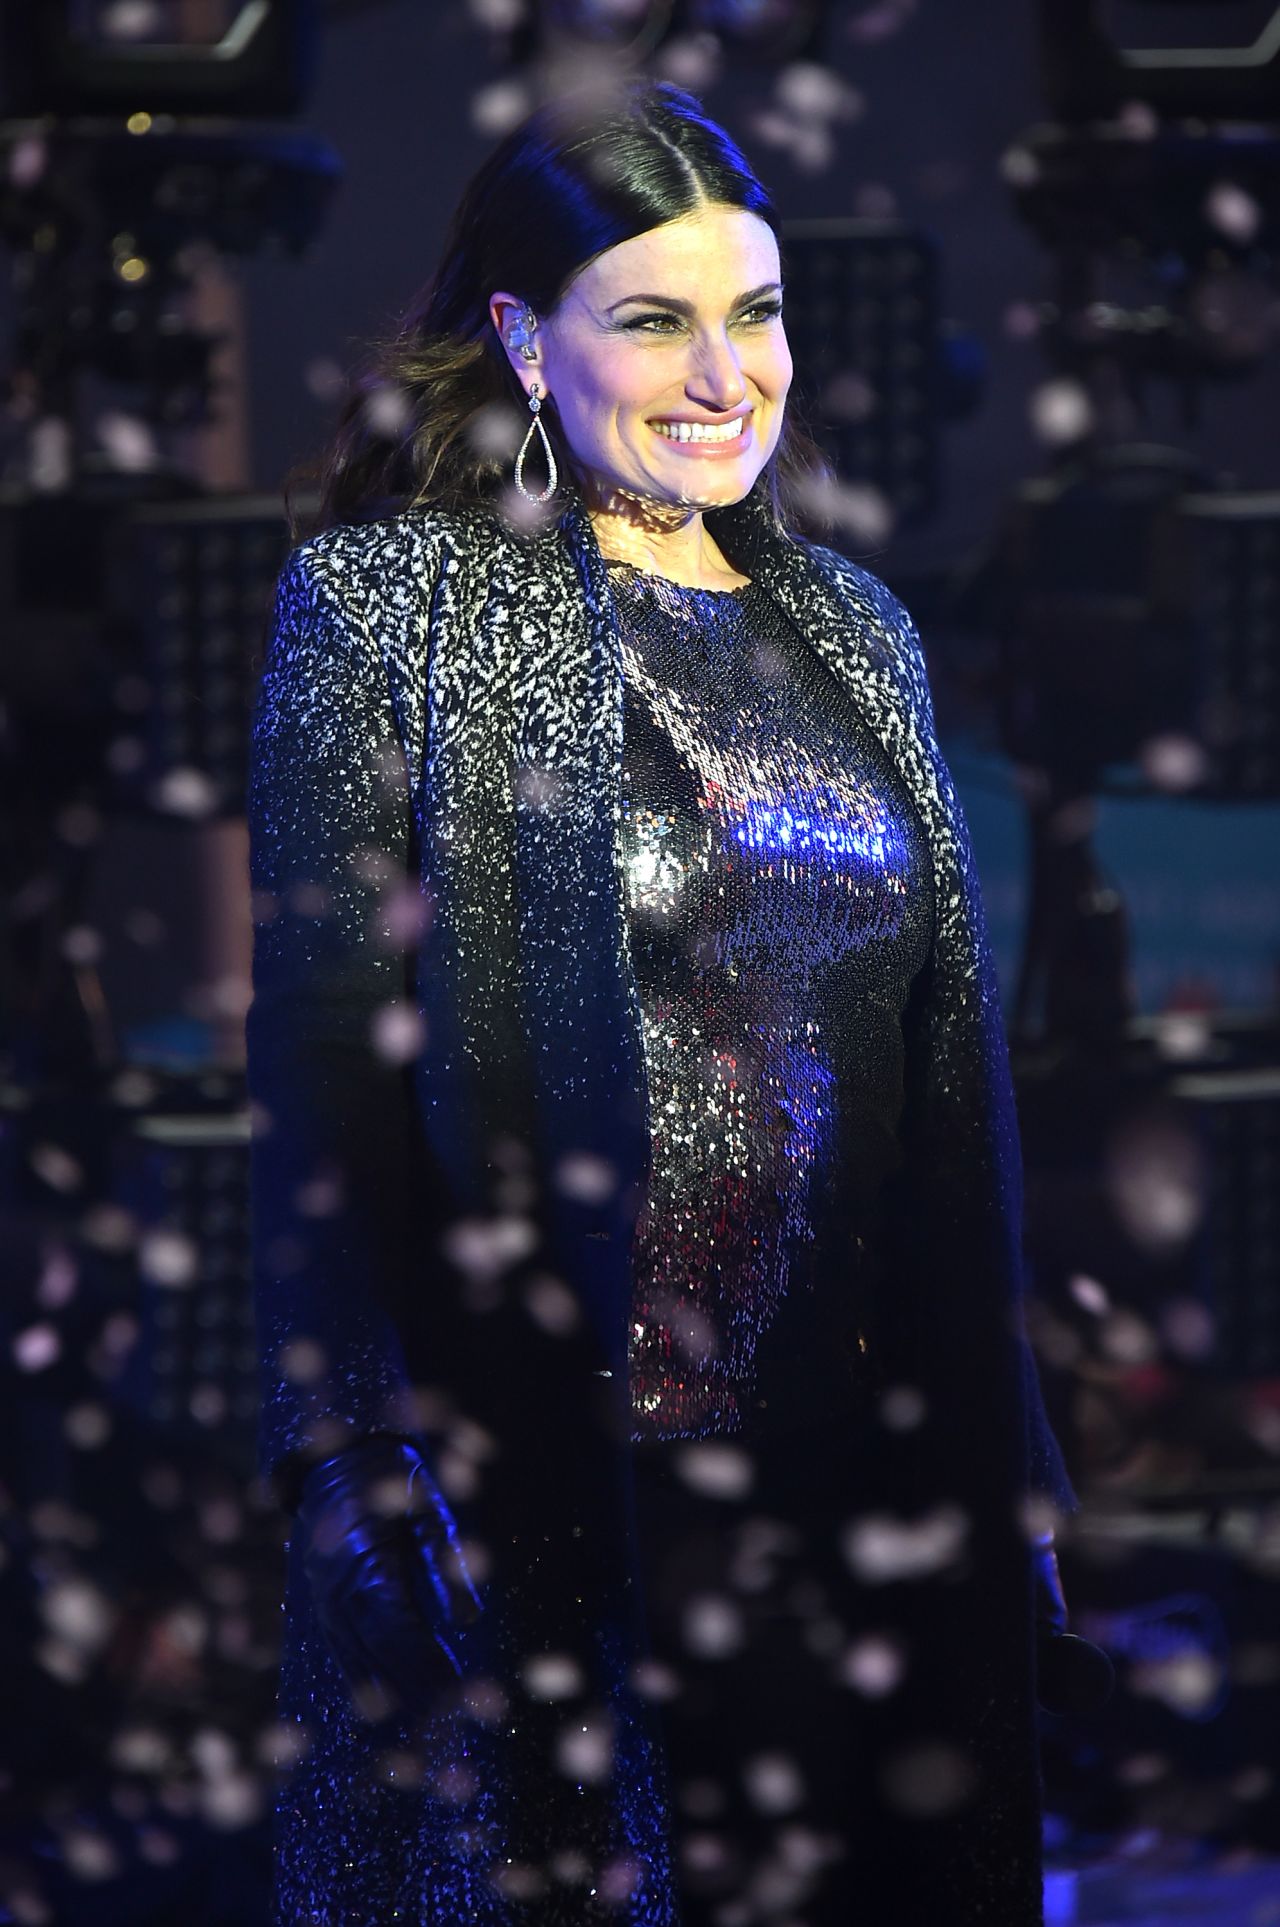 "Let it go" singer Idina Menzel will be serenading fans with the national anthem at the Super Bowl final.